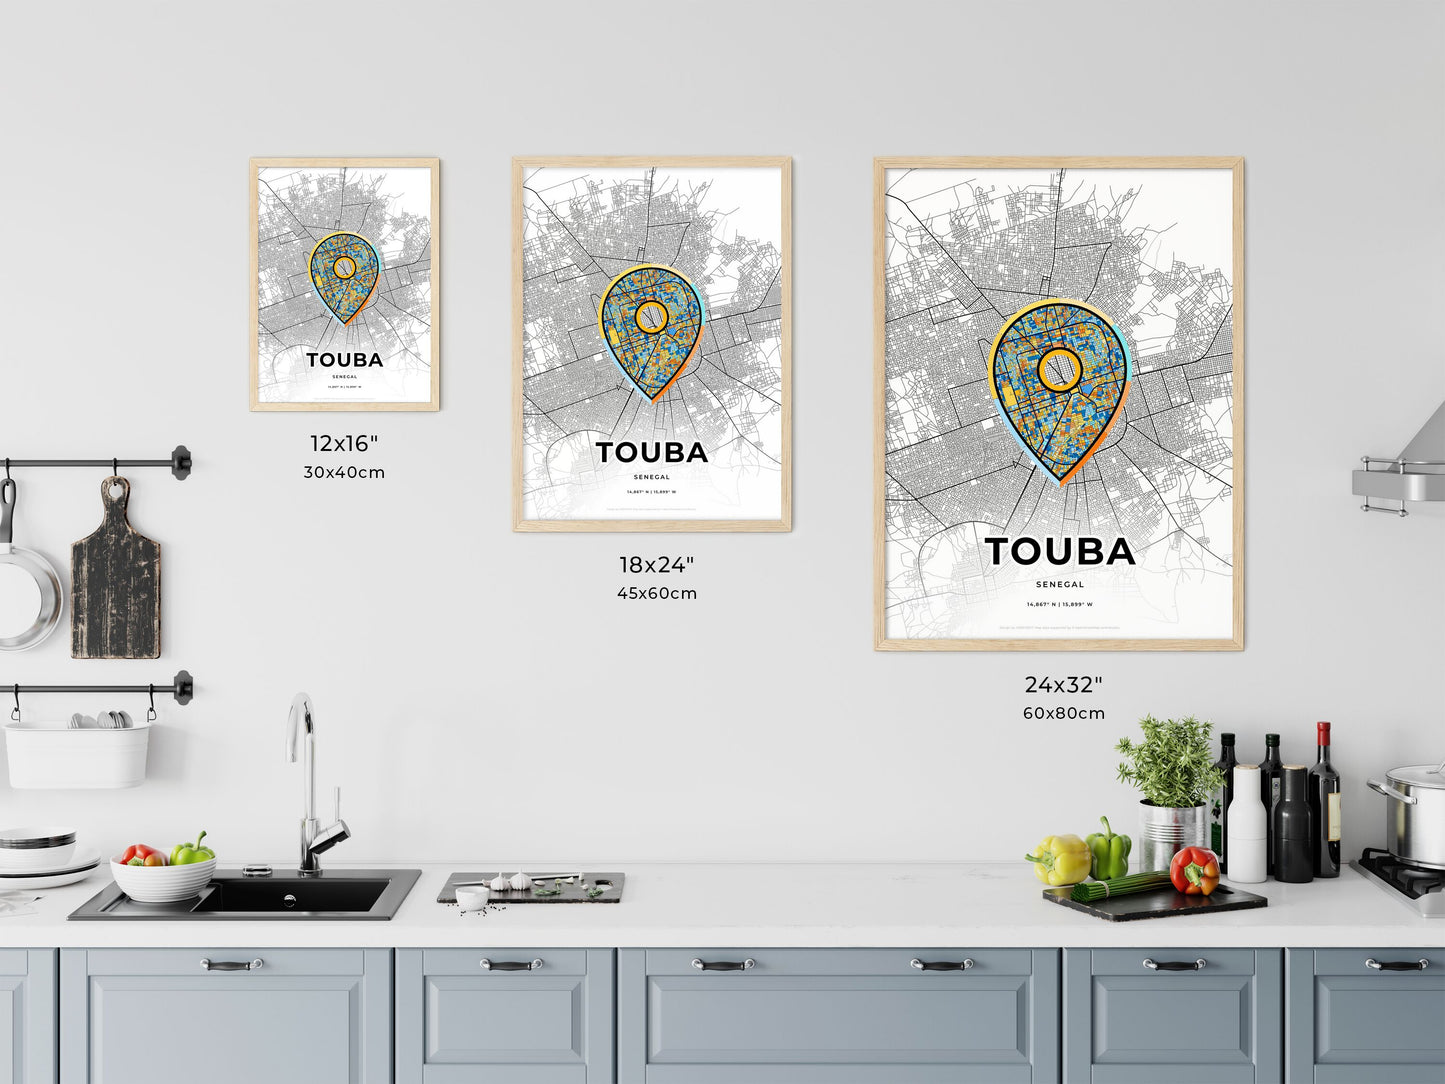 TOUBA SENEGAL minimal art map with a colorful icon. Where it all began, Couple map gift.